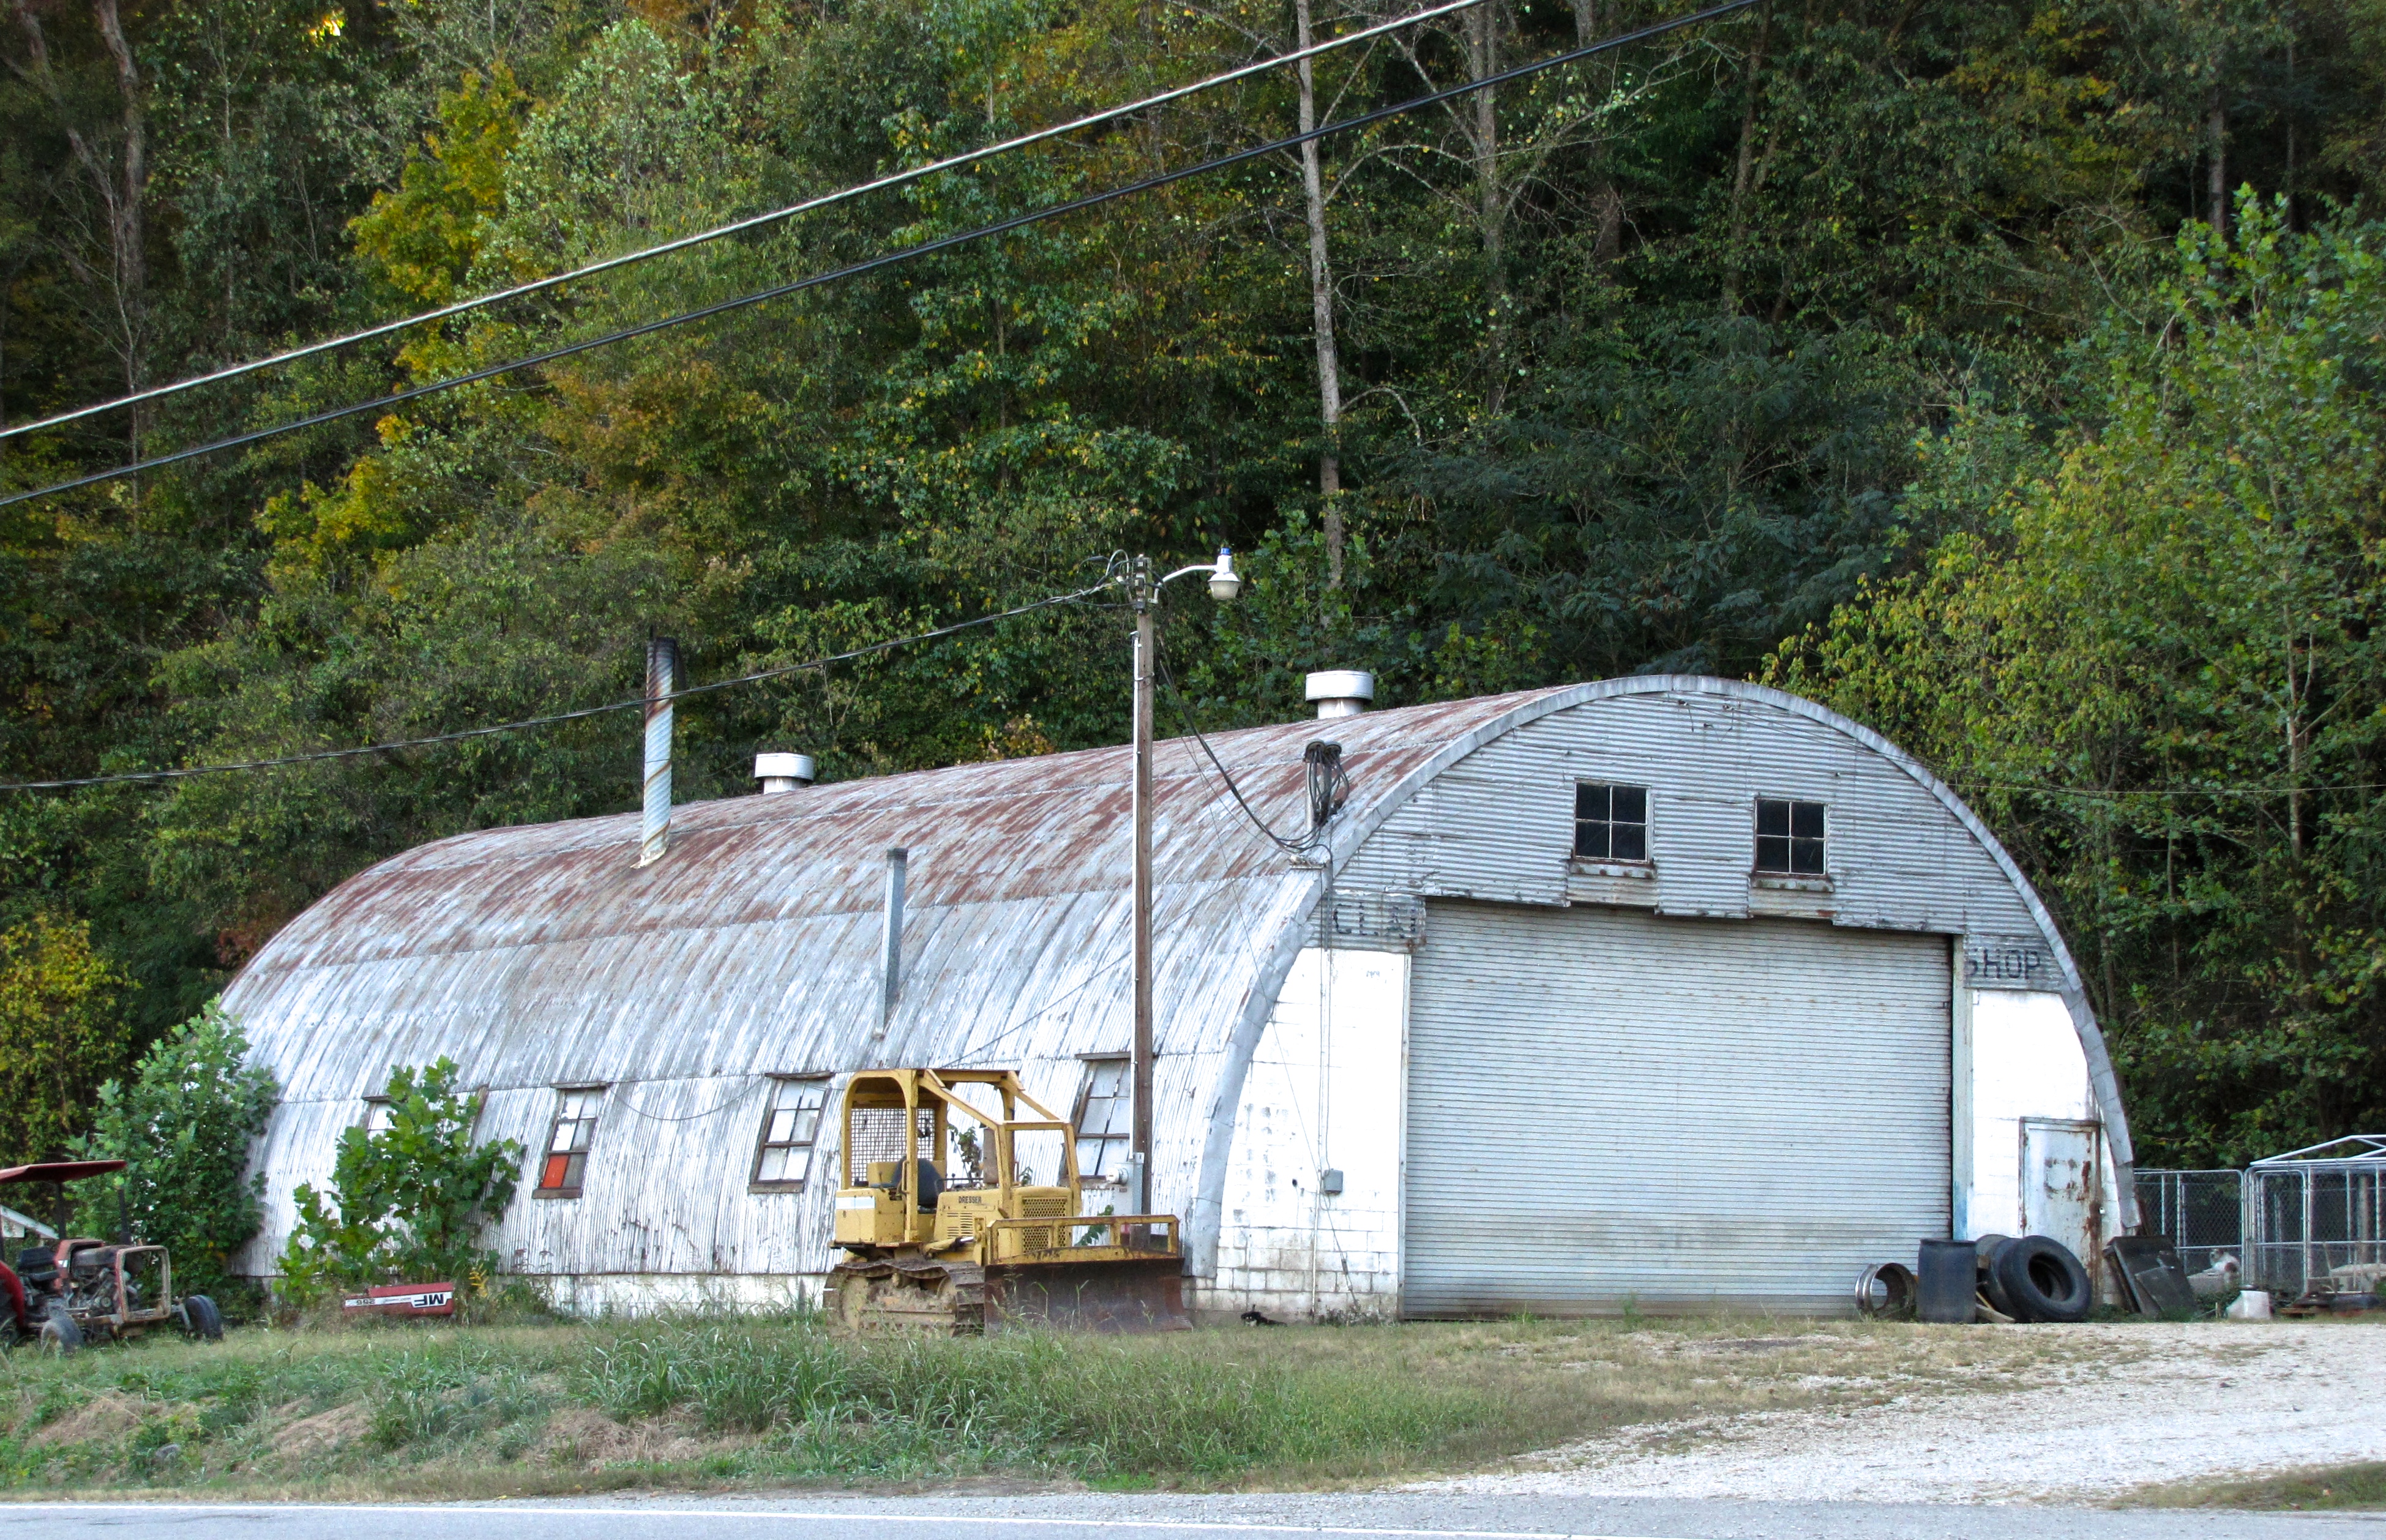 quonset hut in Maumelle, AR